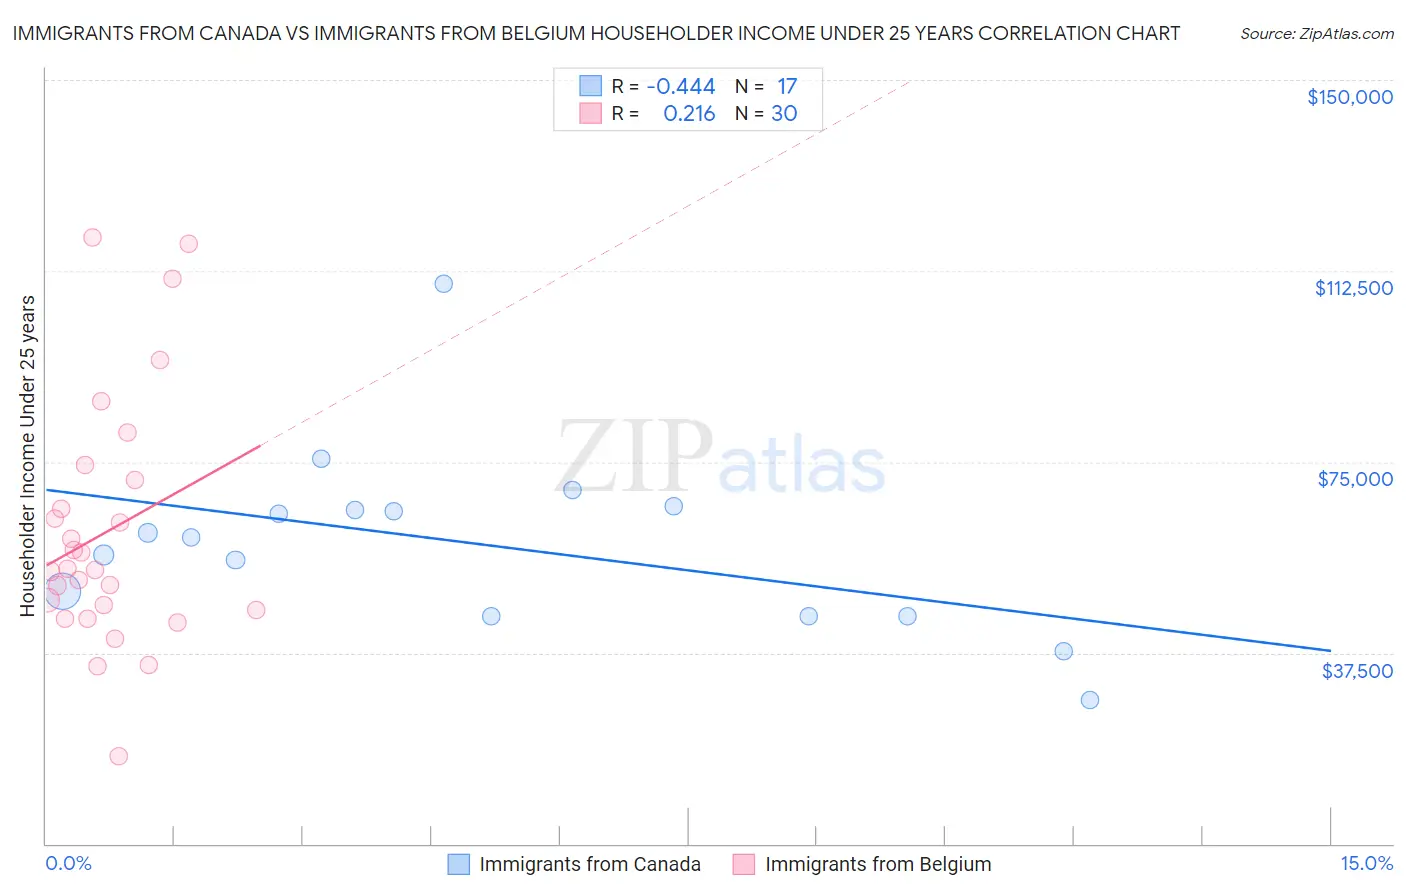 Immigrants from Canada vs Immigrants from Belgium Householder Income Under 25 years